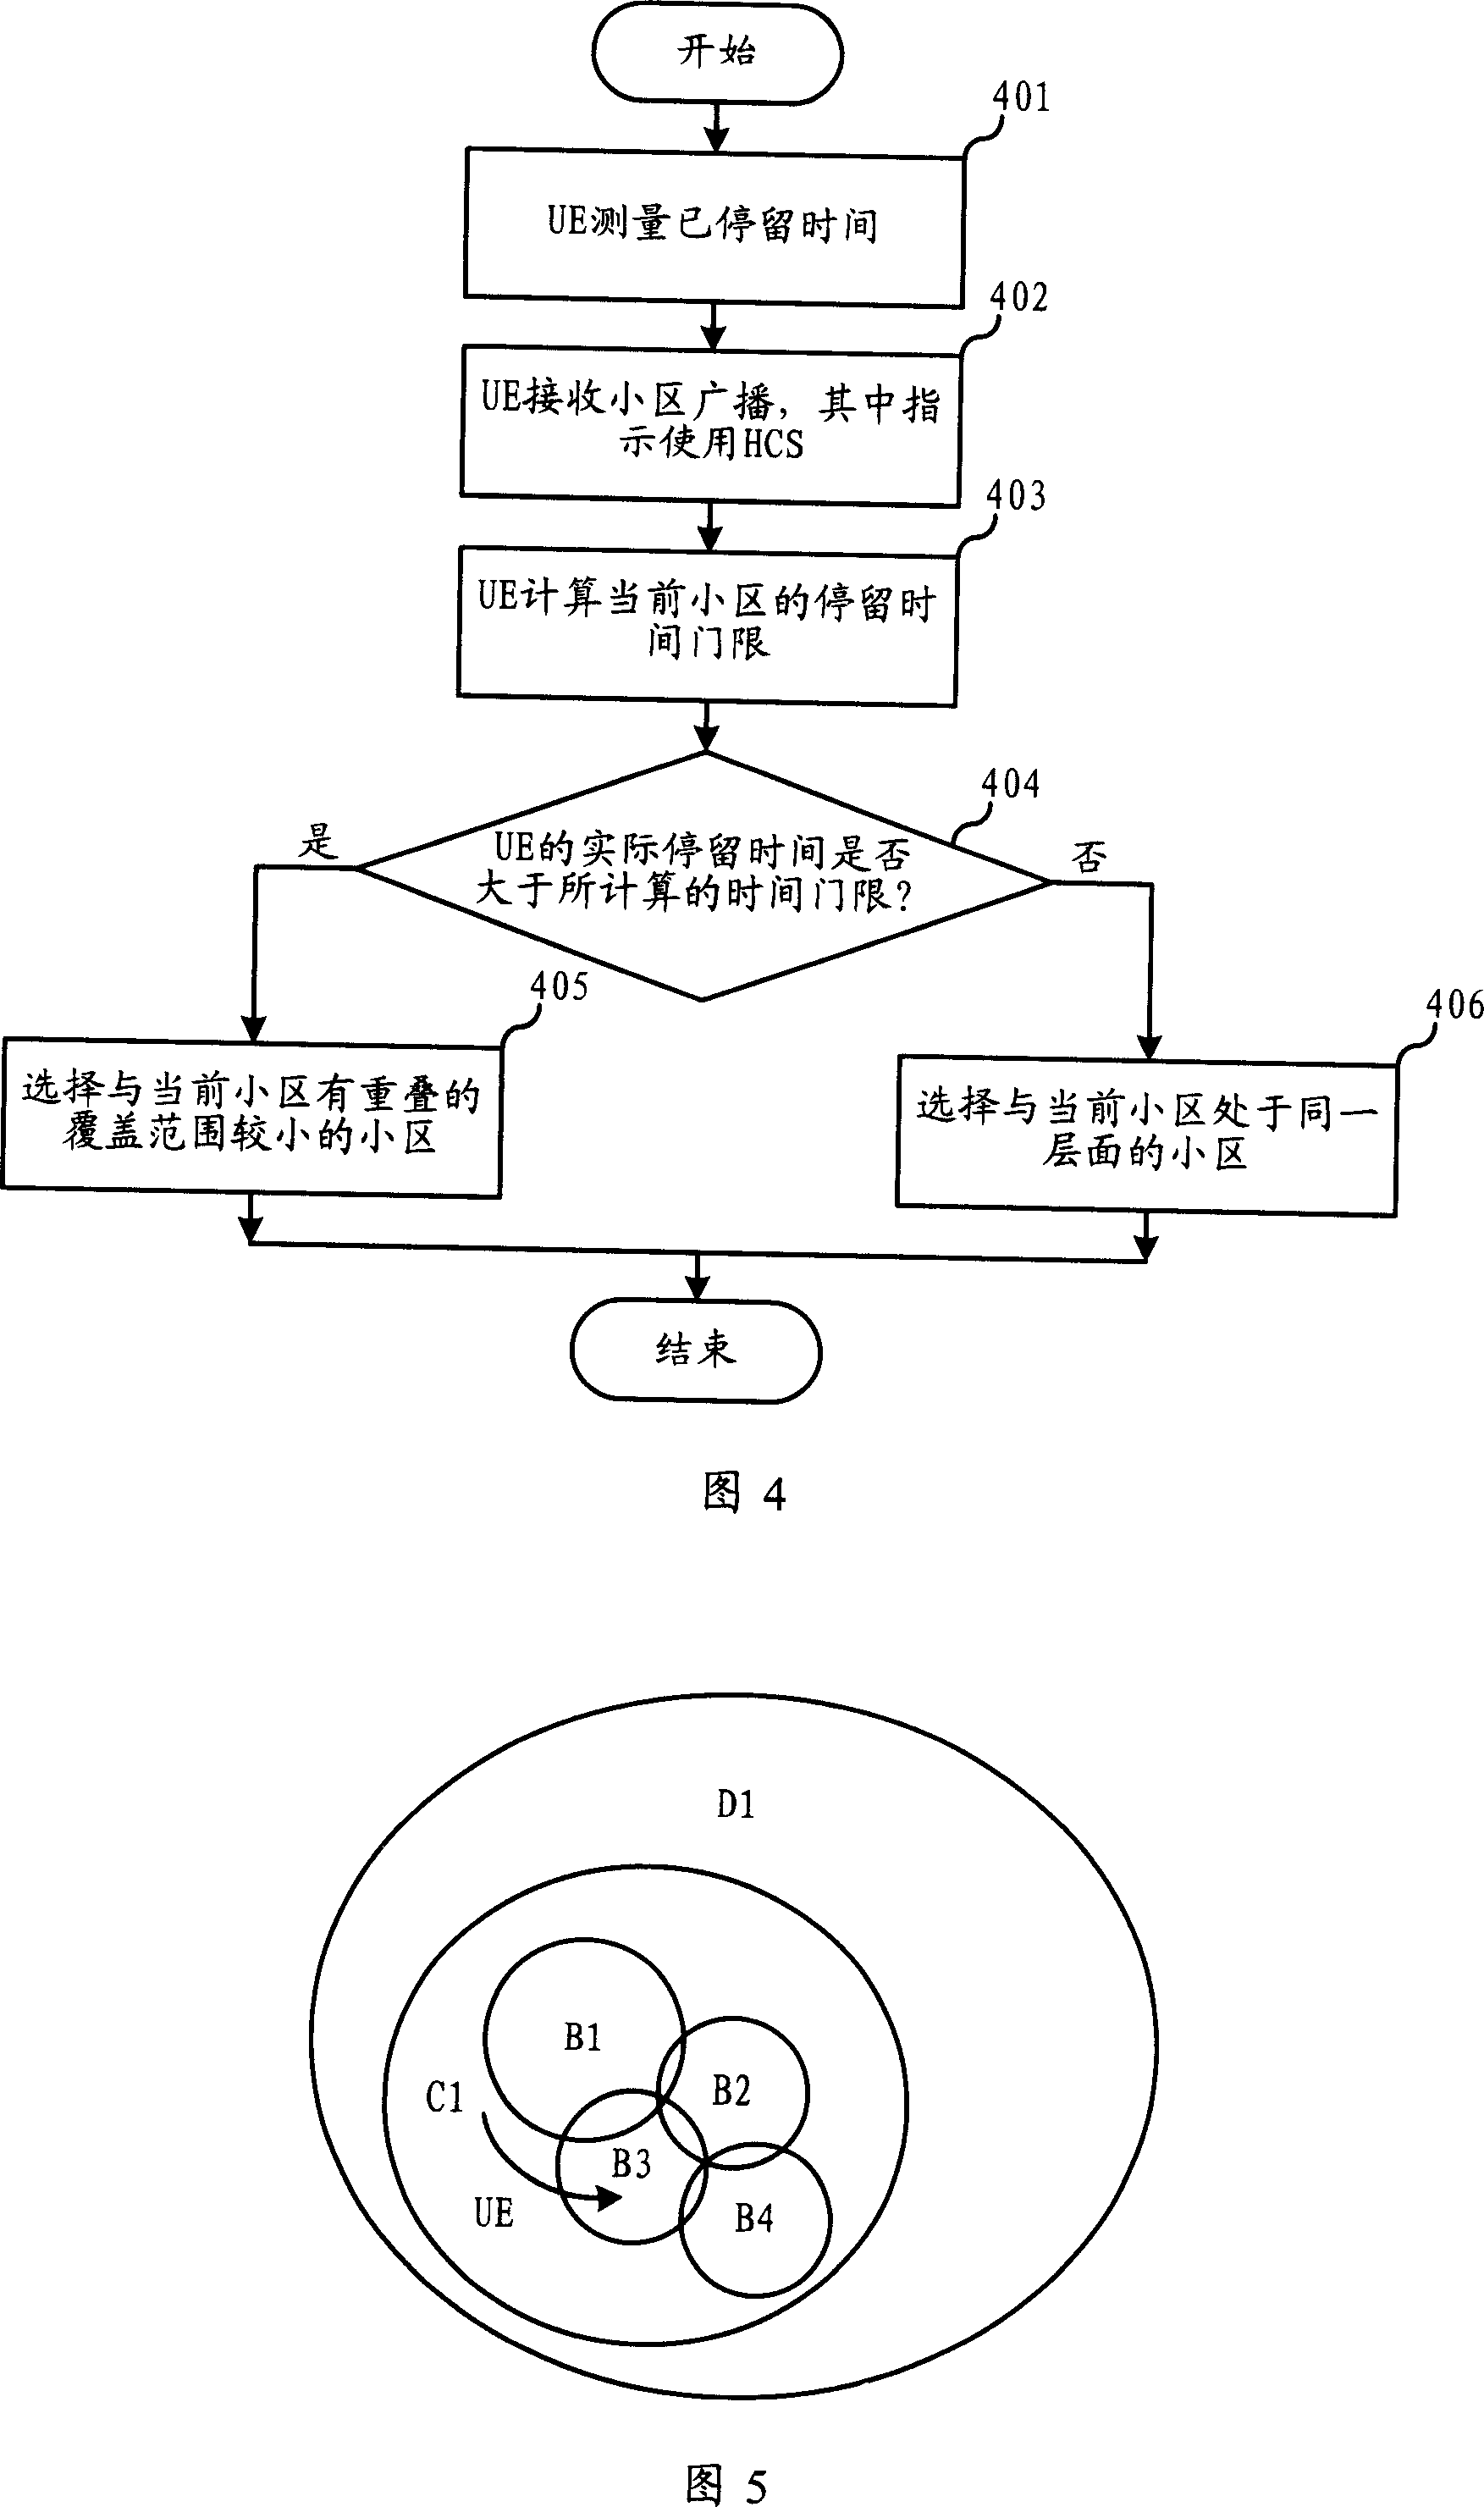 Hierarchical cell reselection method in the mobile communication network